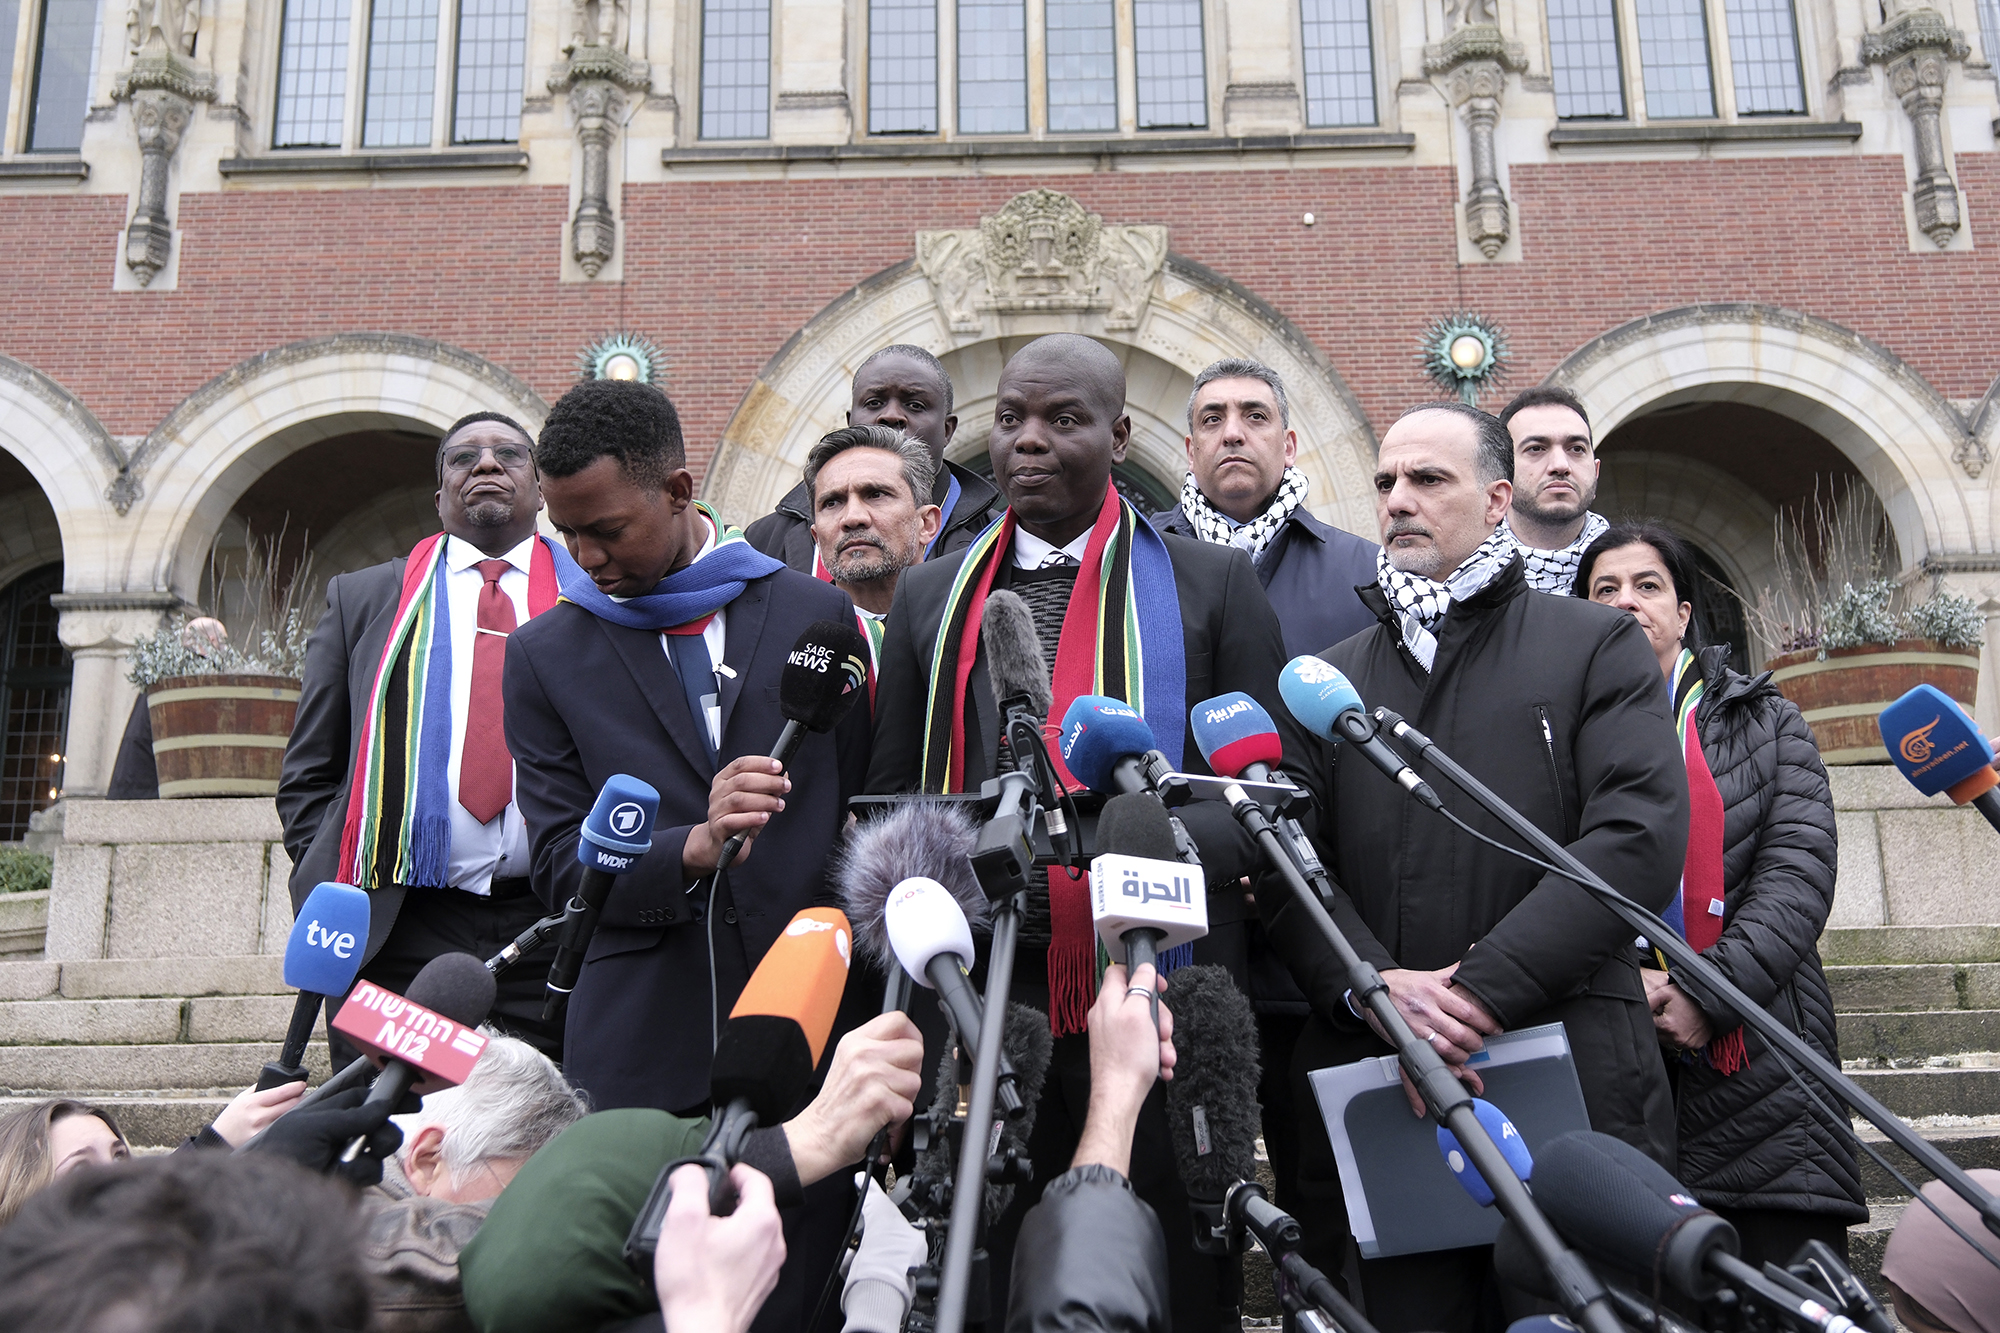 South Africa's Minister of Justice and Correctional Services Ronald Lamola, center, and Palestinian assistant Minister of Multilateral Affairs Ammar Hijazi, third right, address the media outside the International Court of Justice in The Hague, Netherlands, on January 11.